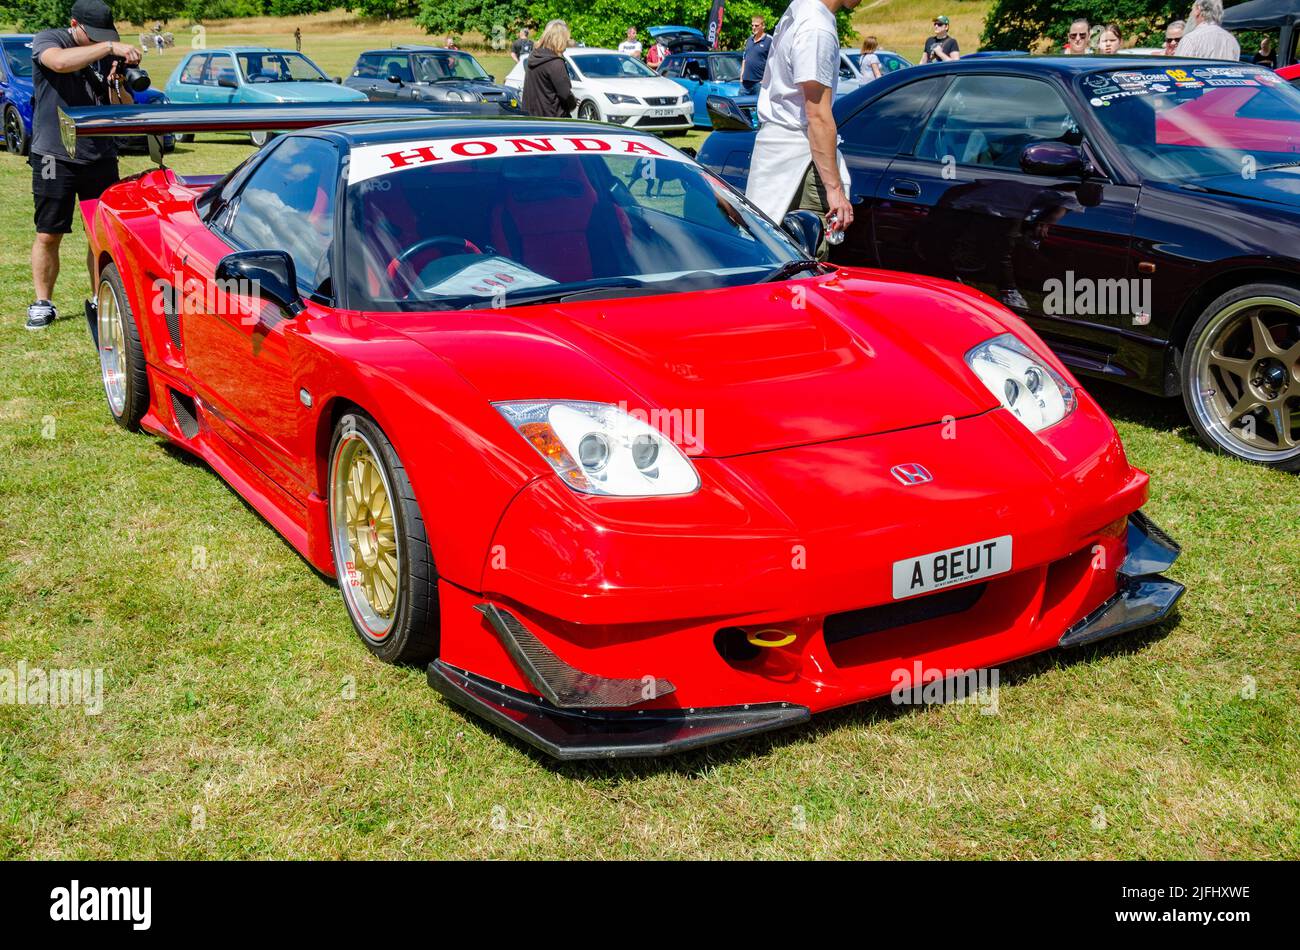 Front view of a red 1992 Honda NSX sports car at The Berkshire Motor Show in Reading, UK Stock Photo